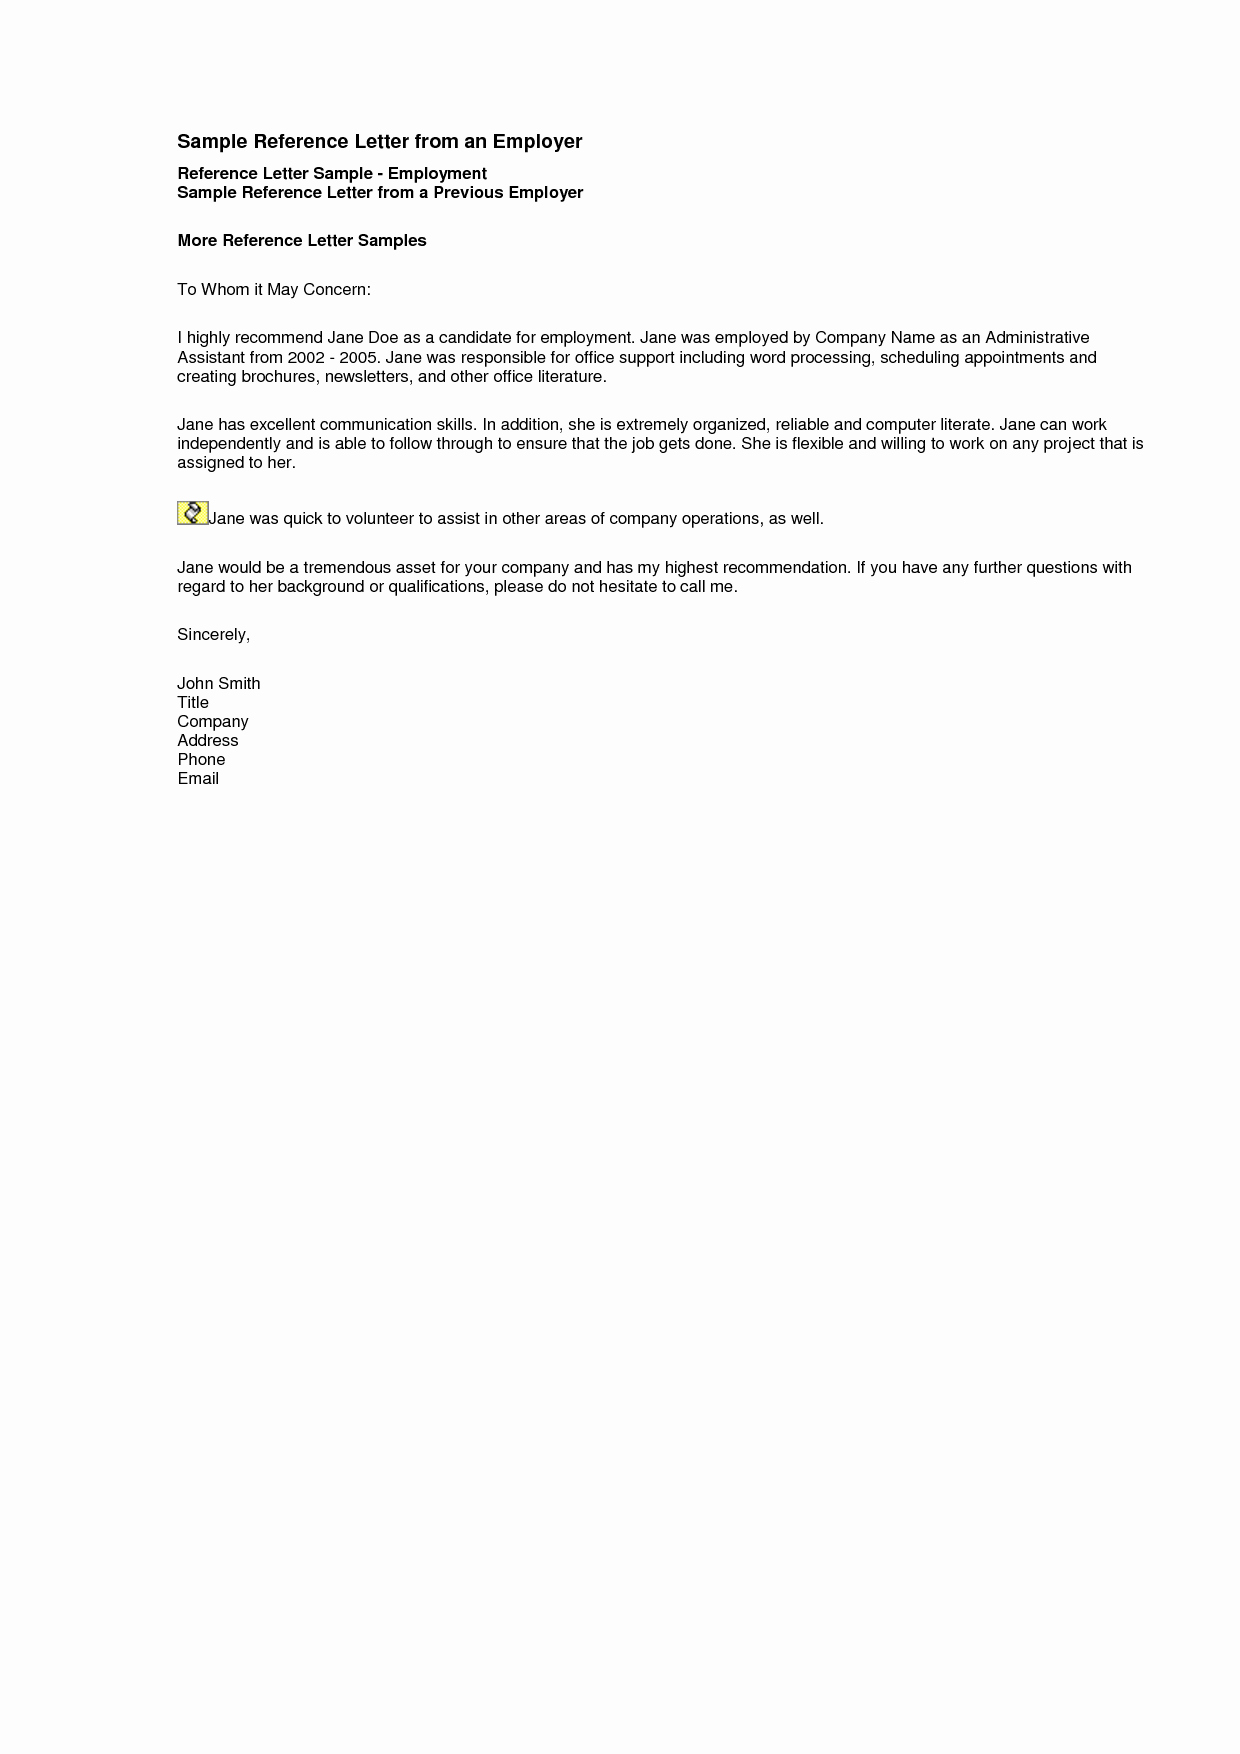 Sample Of Letter Of Reference Luxury Sample Reference Letter for Employment